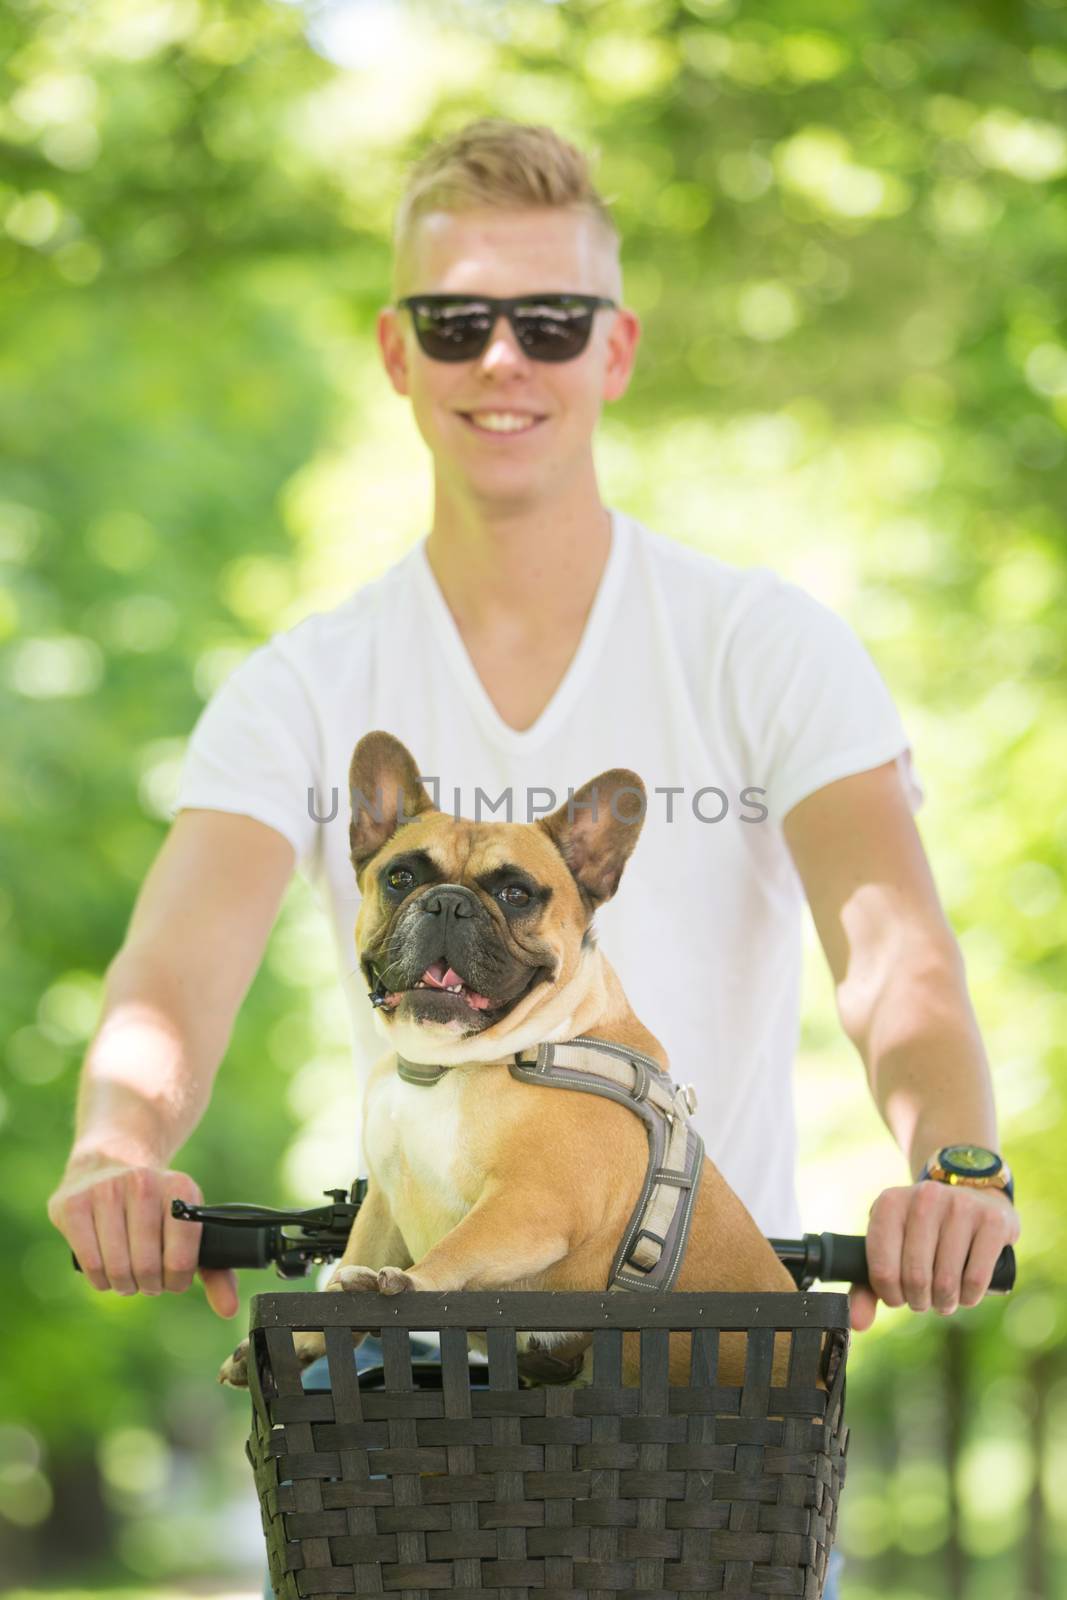 French bulldog dog enjoying riding in bycicle basket in city park by kasto